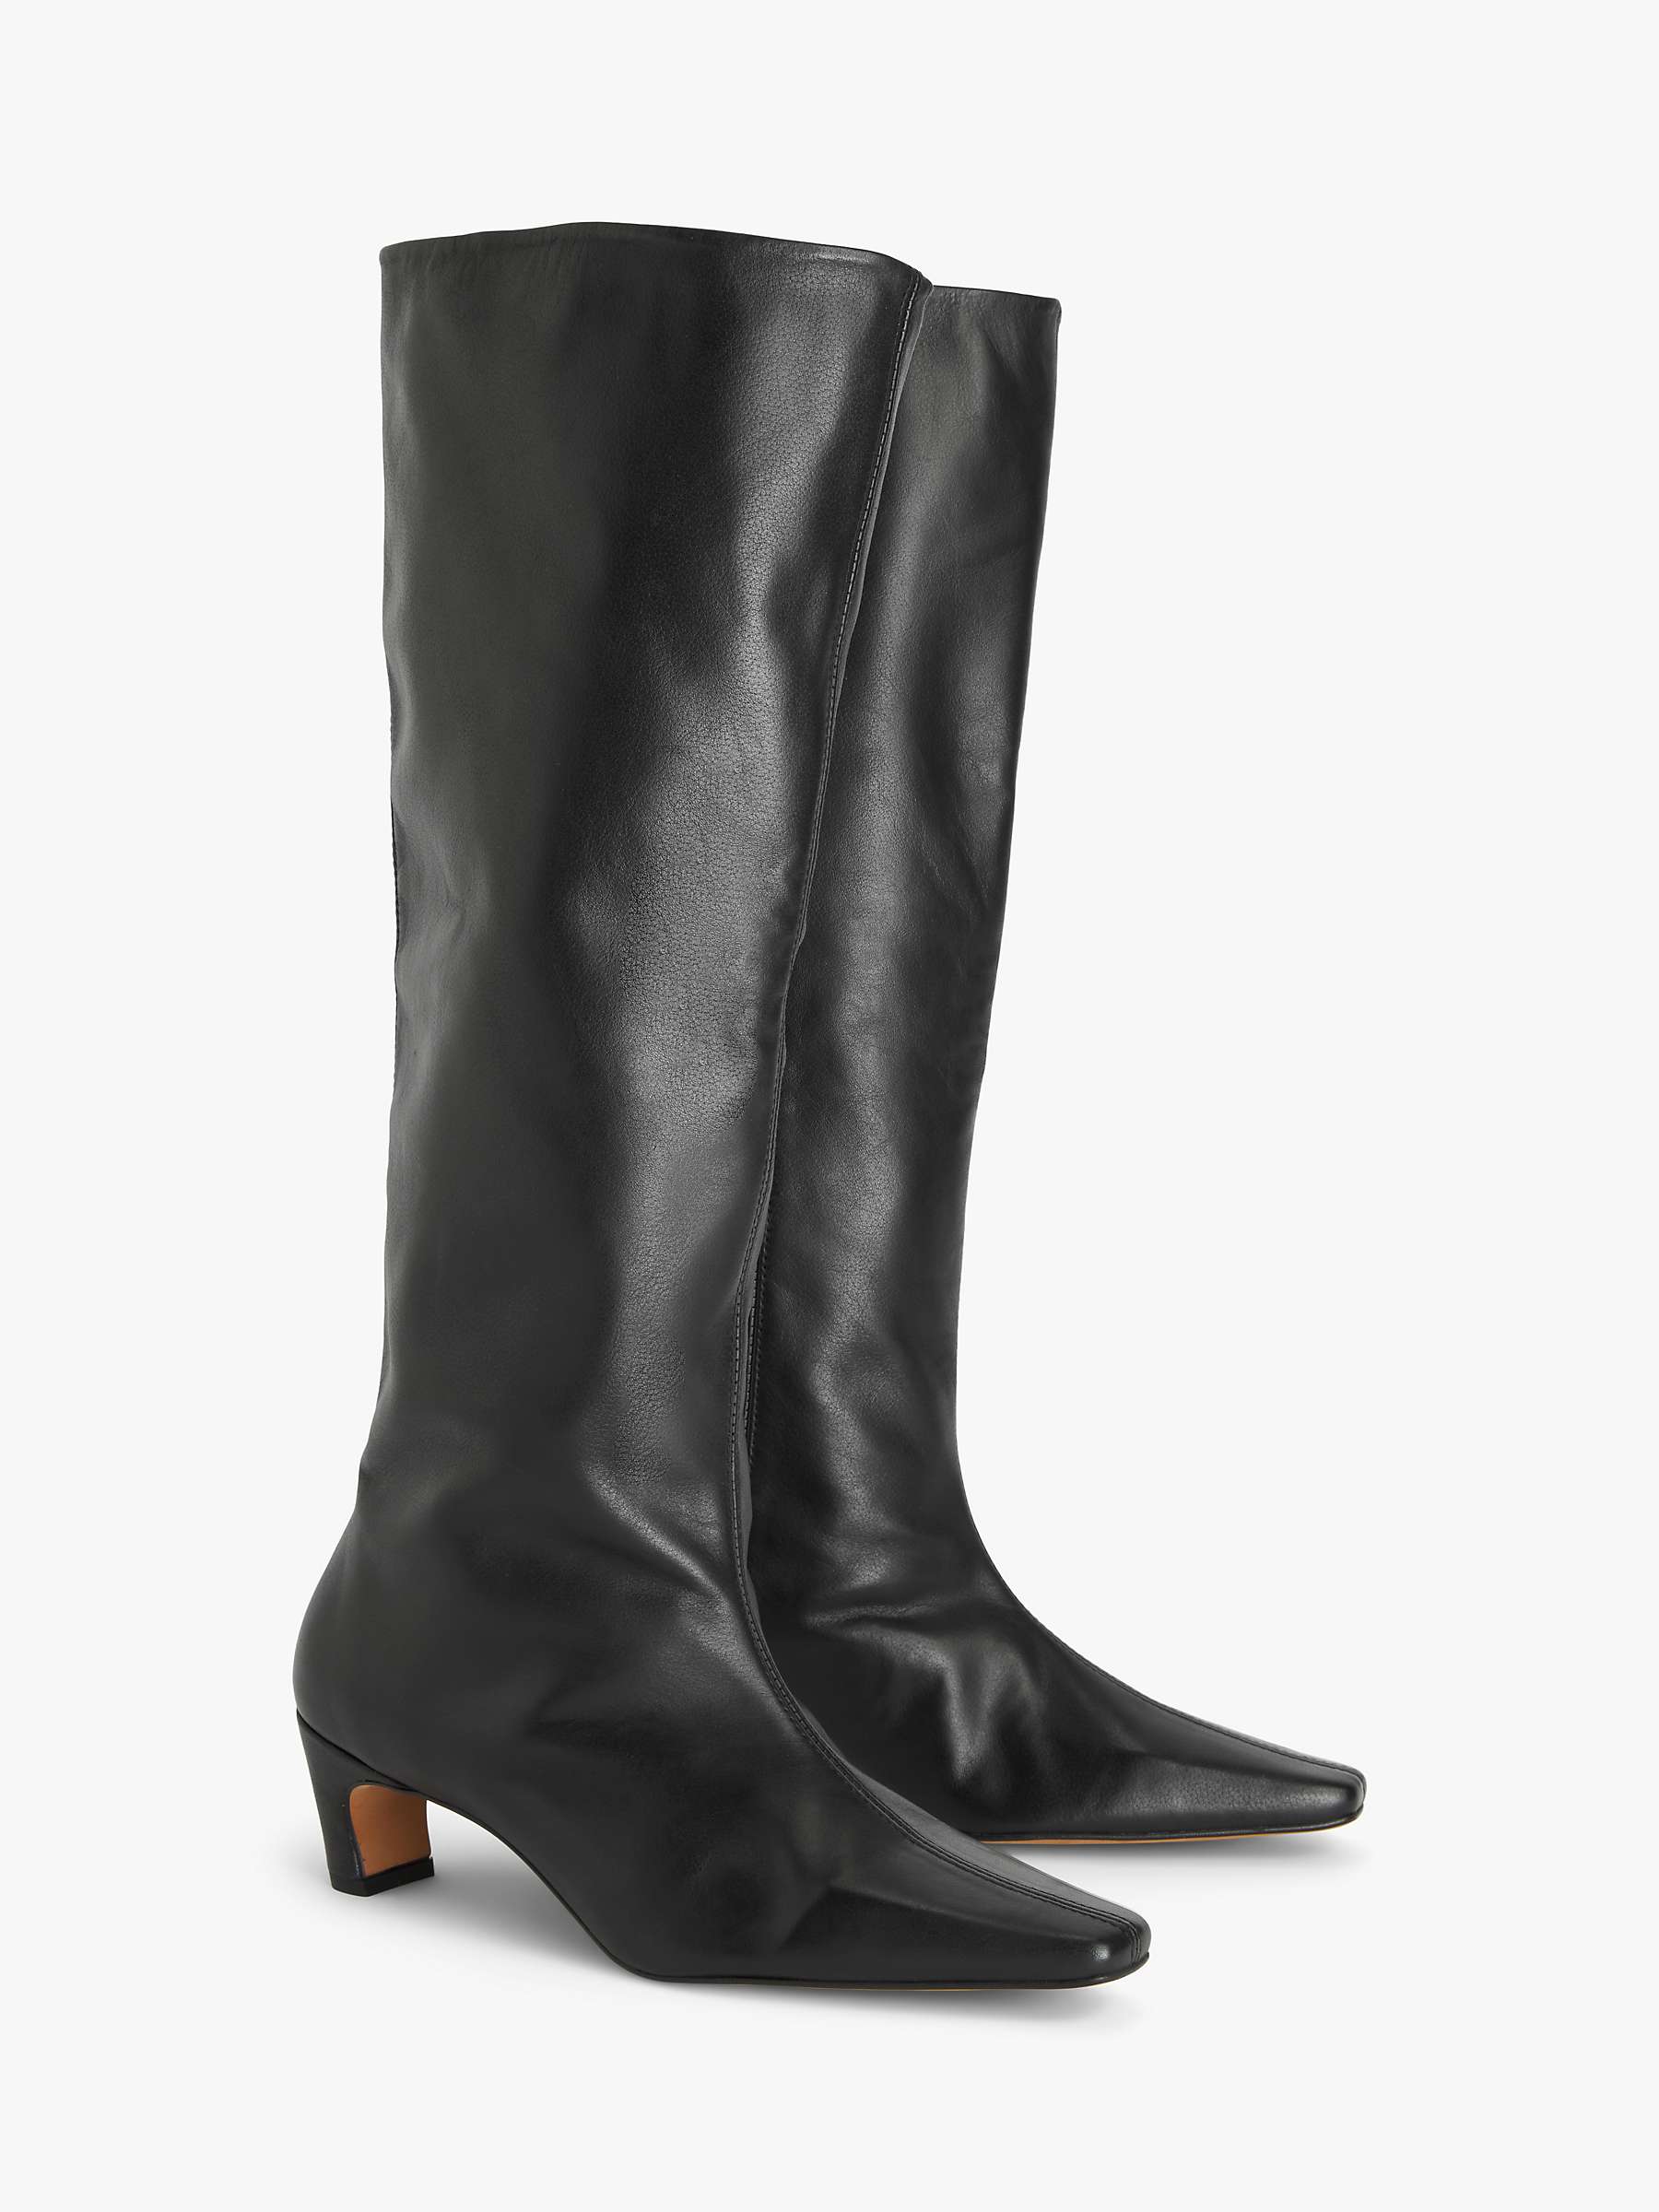 Buy John Lewis Sydnie Leather Chisel Toe Pull On Knee Boots Online at johnlewis.com